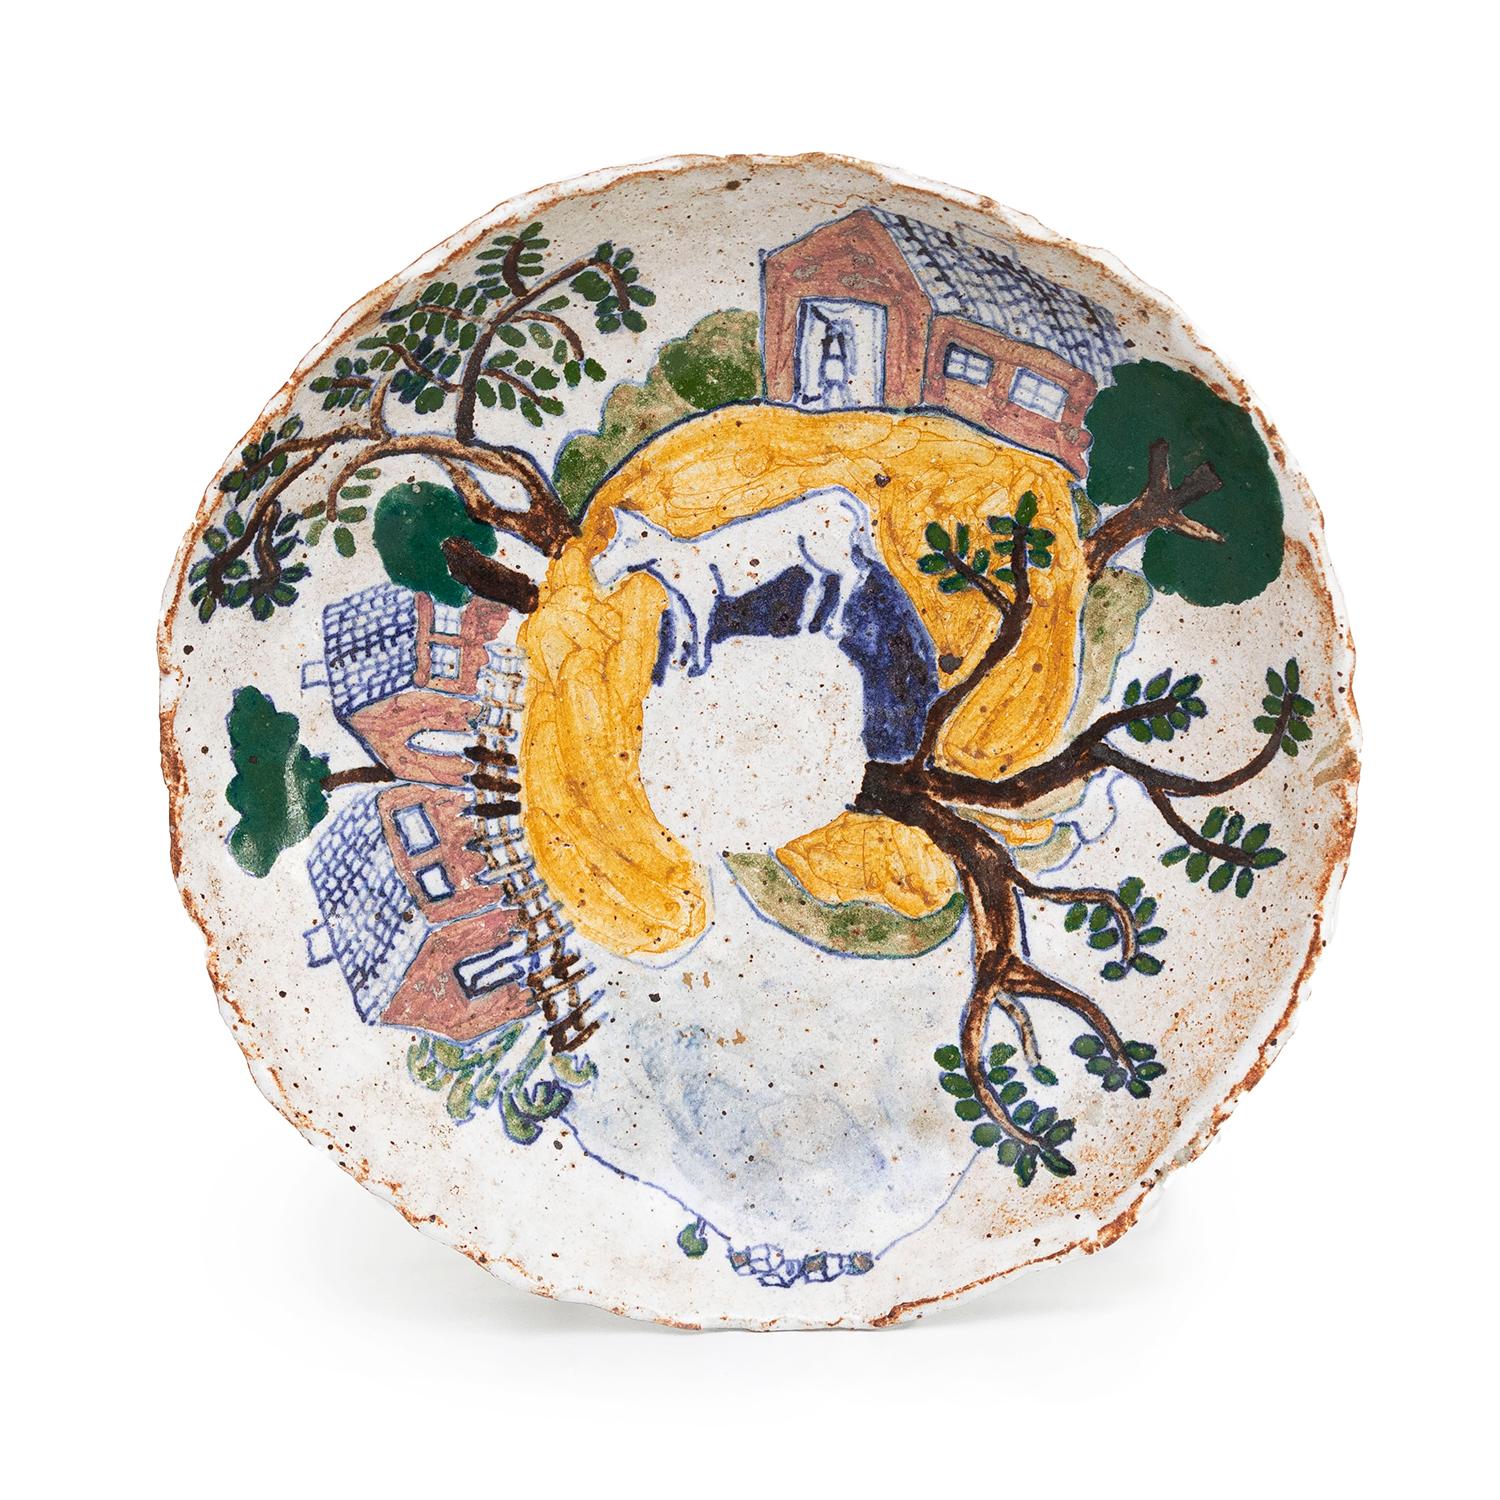 Magdalena Suarez Frimkess
Country Scene Saucer (INV# NP3433)
stoneware, underglaze and glaze
1984
signed

Magdalena Suarez Frimkess and Michael Frimkess began working together in 1963. Their fifty-eight year collaboration produced an intriguing body